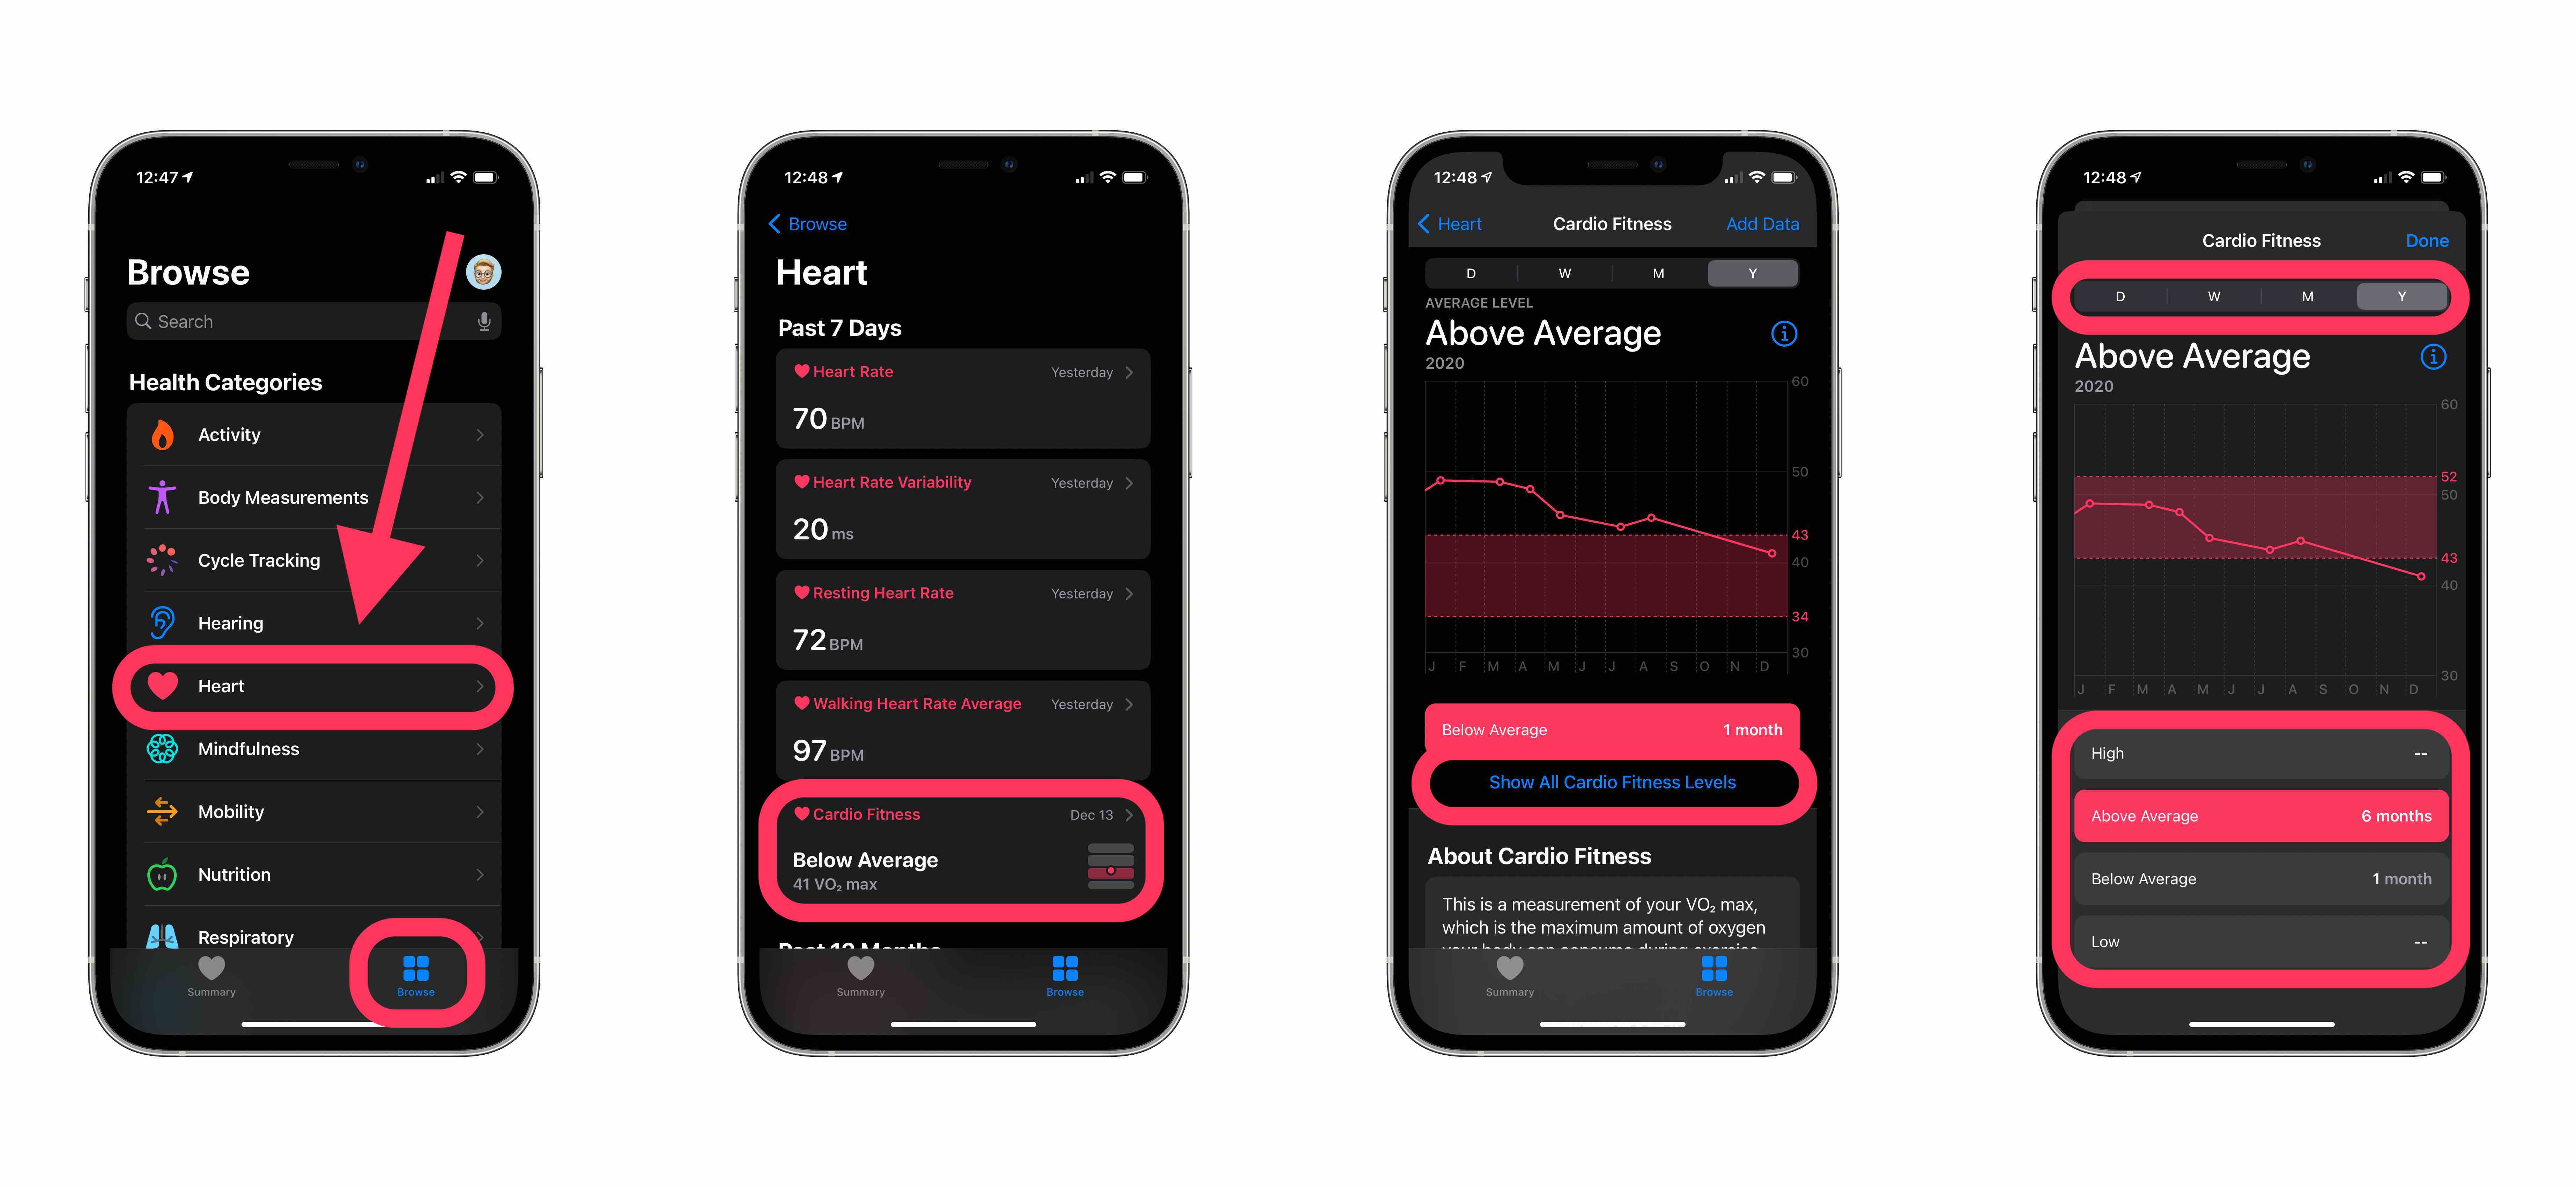 How to use Cardio Fitness on iPhone Apple Watch walkthrough more